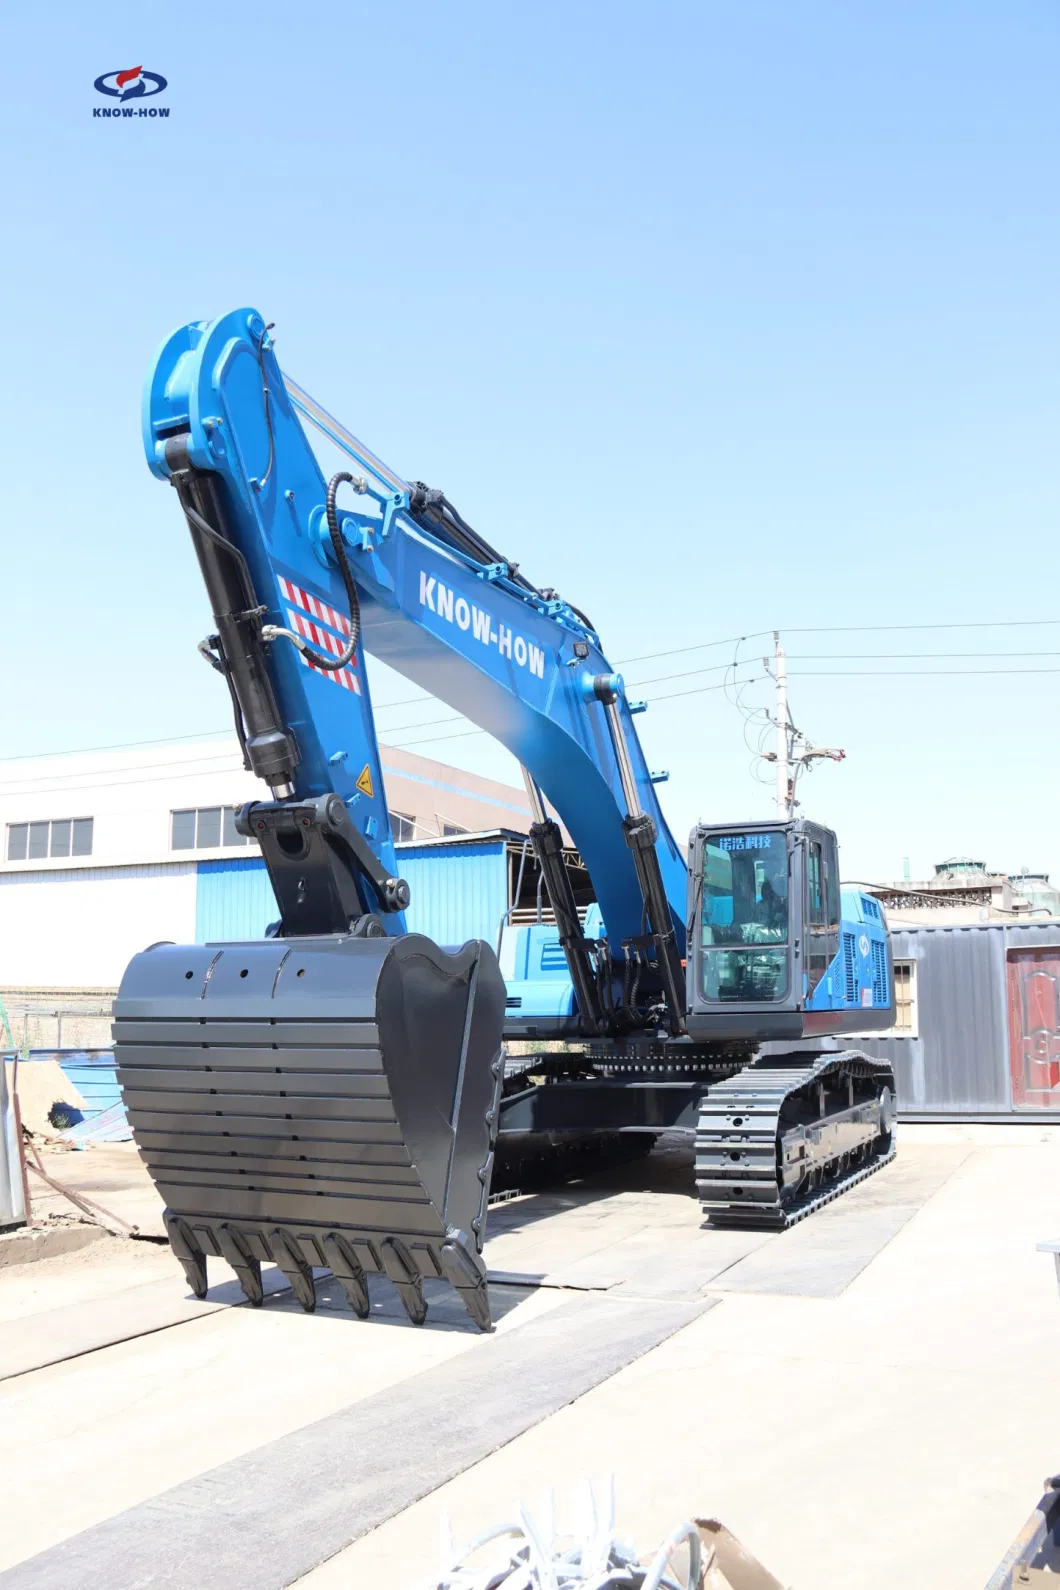 Nwm560f Know-How Excavator 52.5t Loading ,50t,60t Backhoe Loader,Big Mining Excavator,Heavy Excavator,China Qualified Equipment Crawler Machinery Huge Excavator